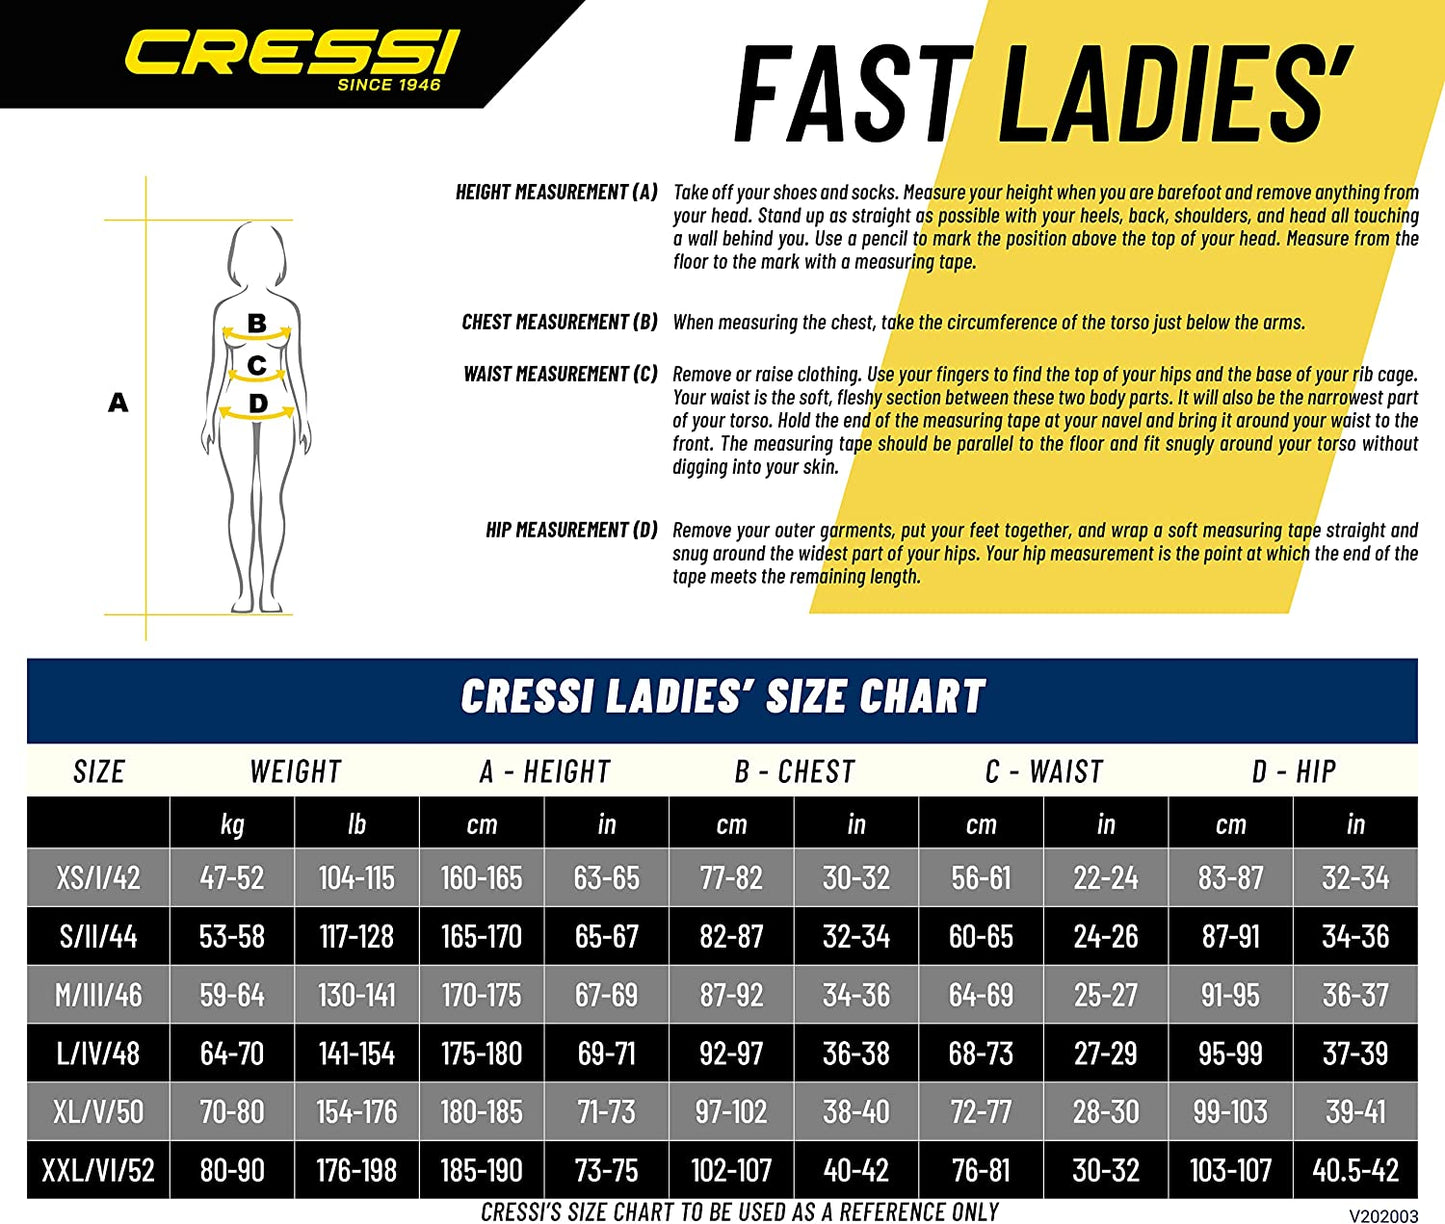 Cressi Fast Wetsuit 3mm - Lady